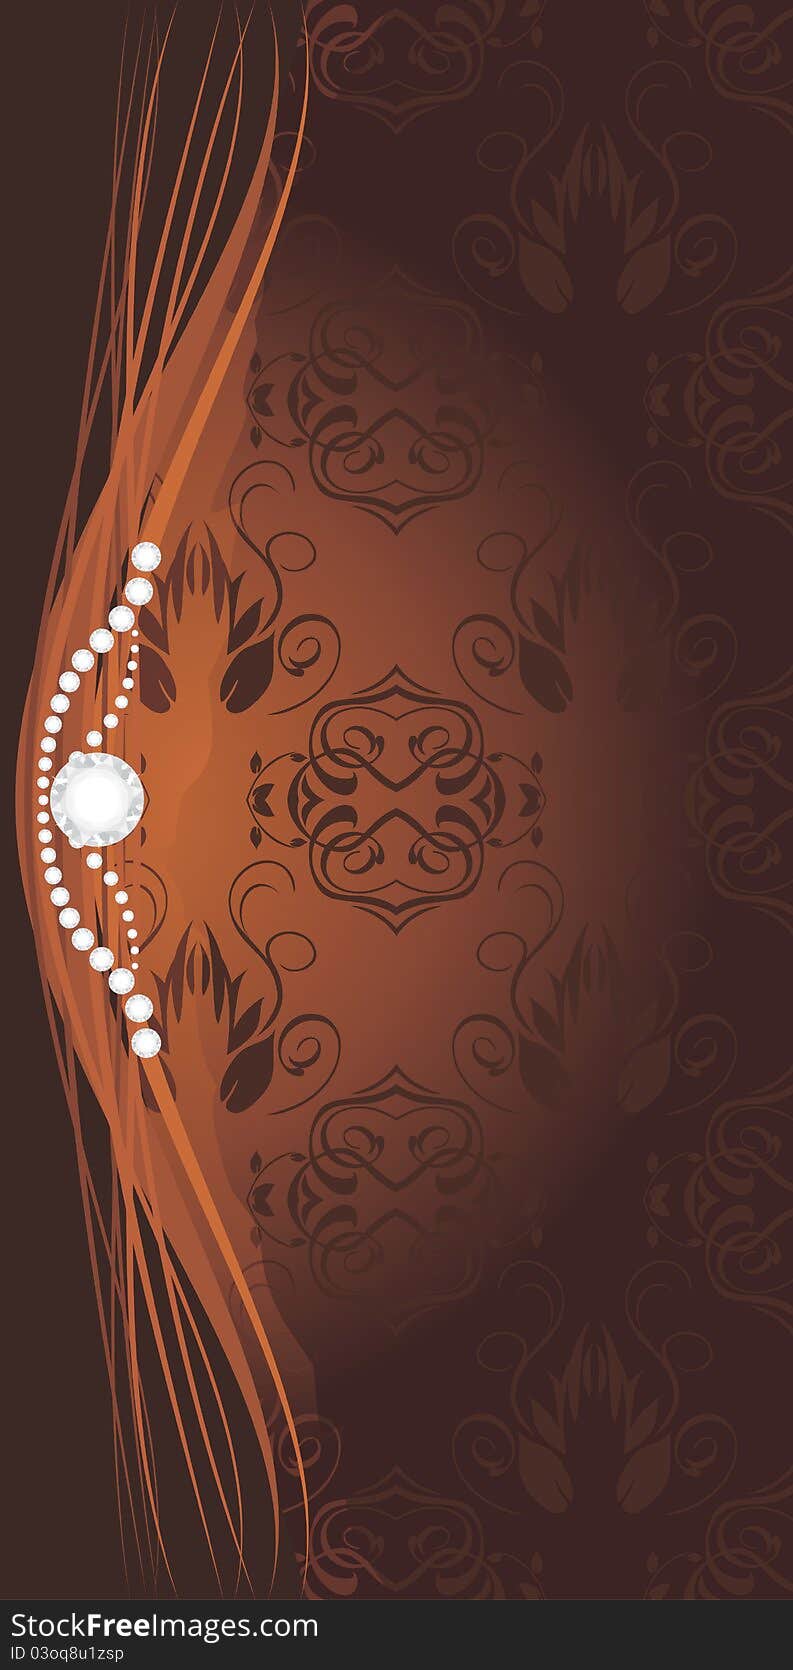 Shining strasses on the decorative brown background for design. Illustration